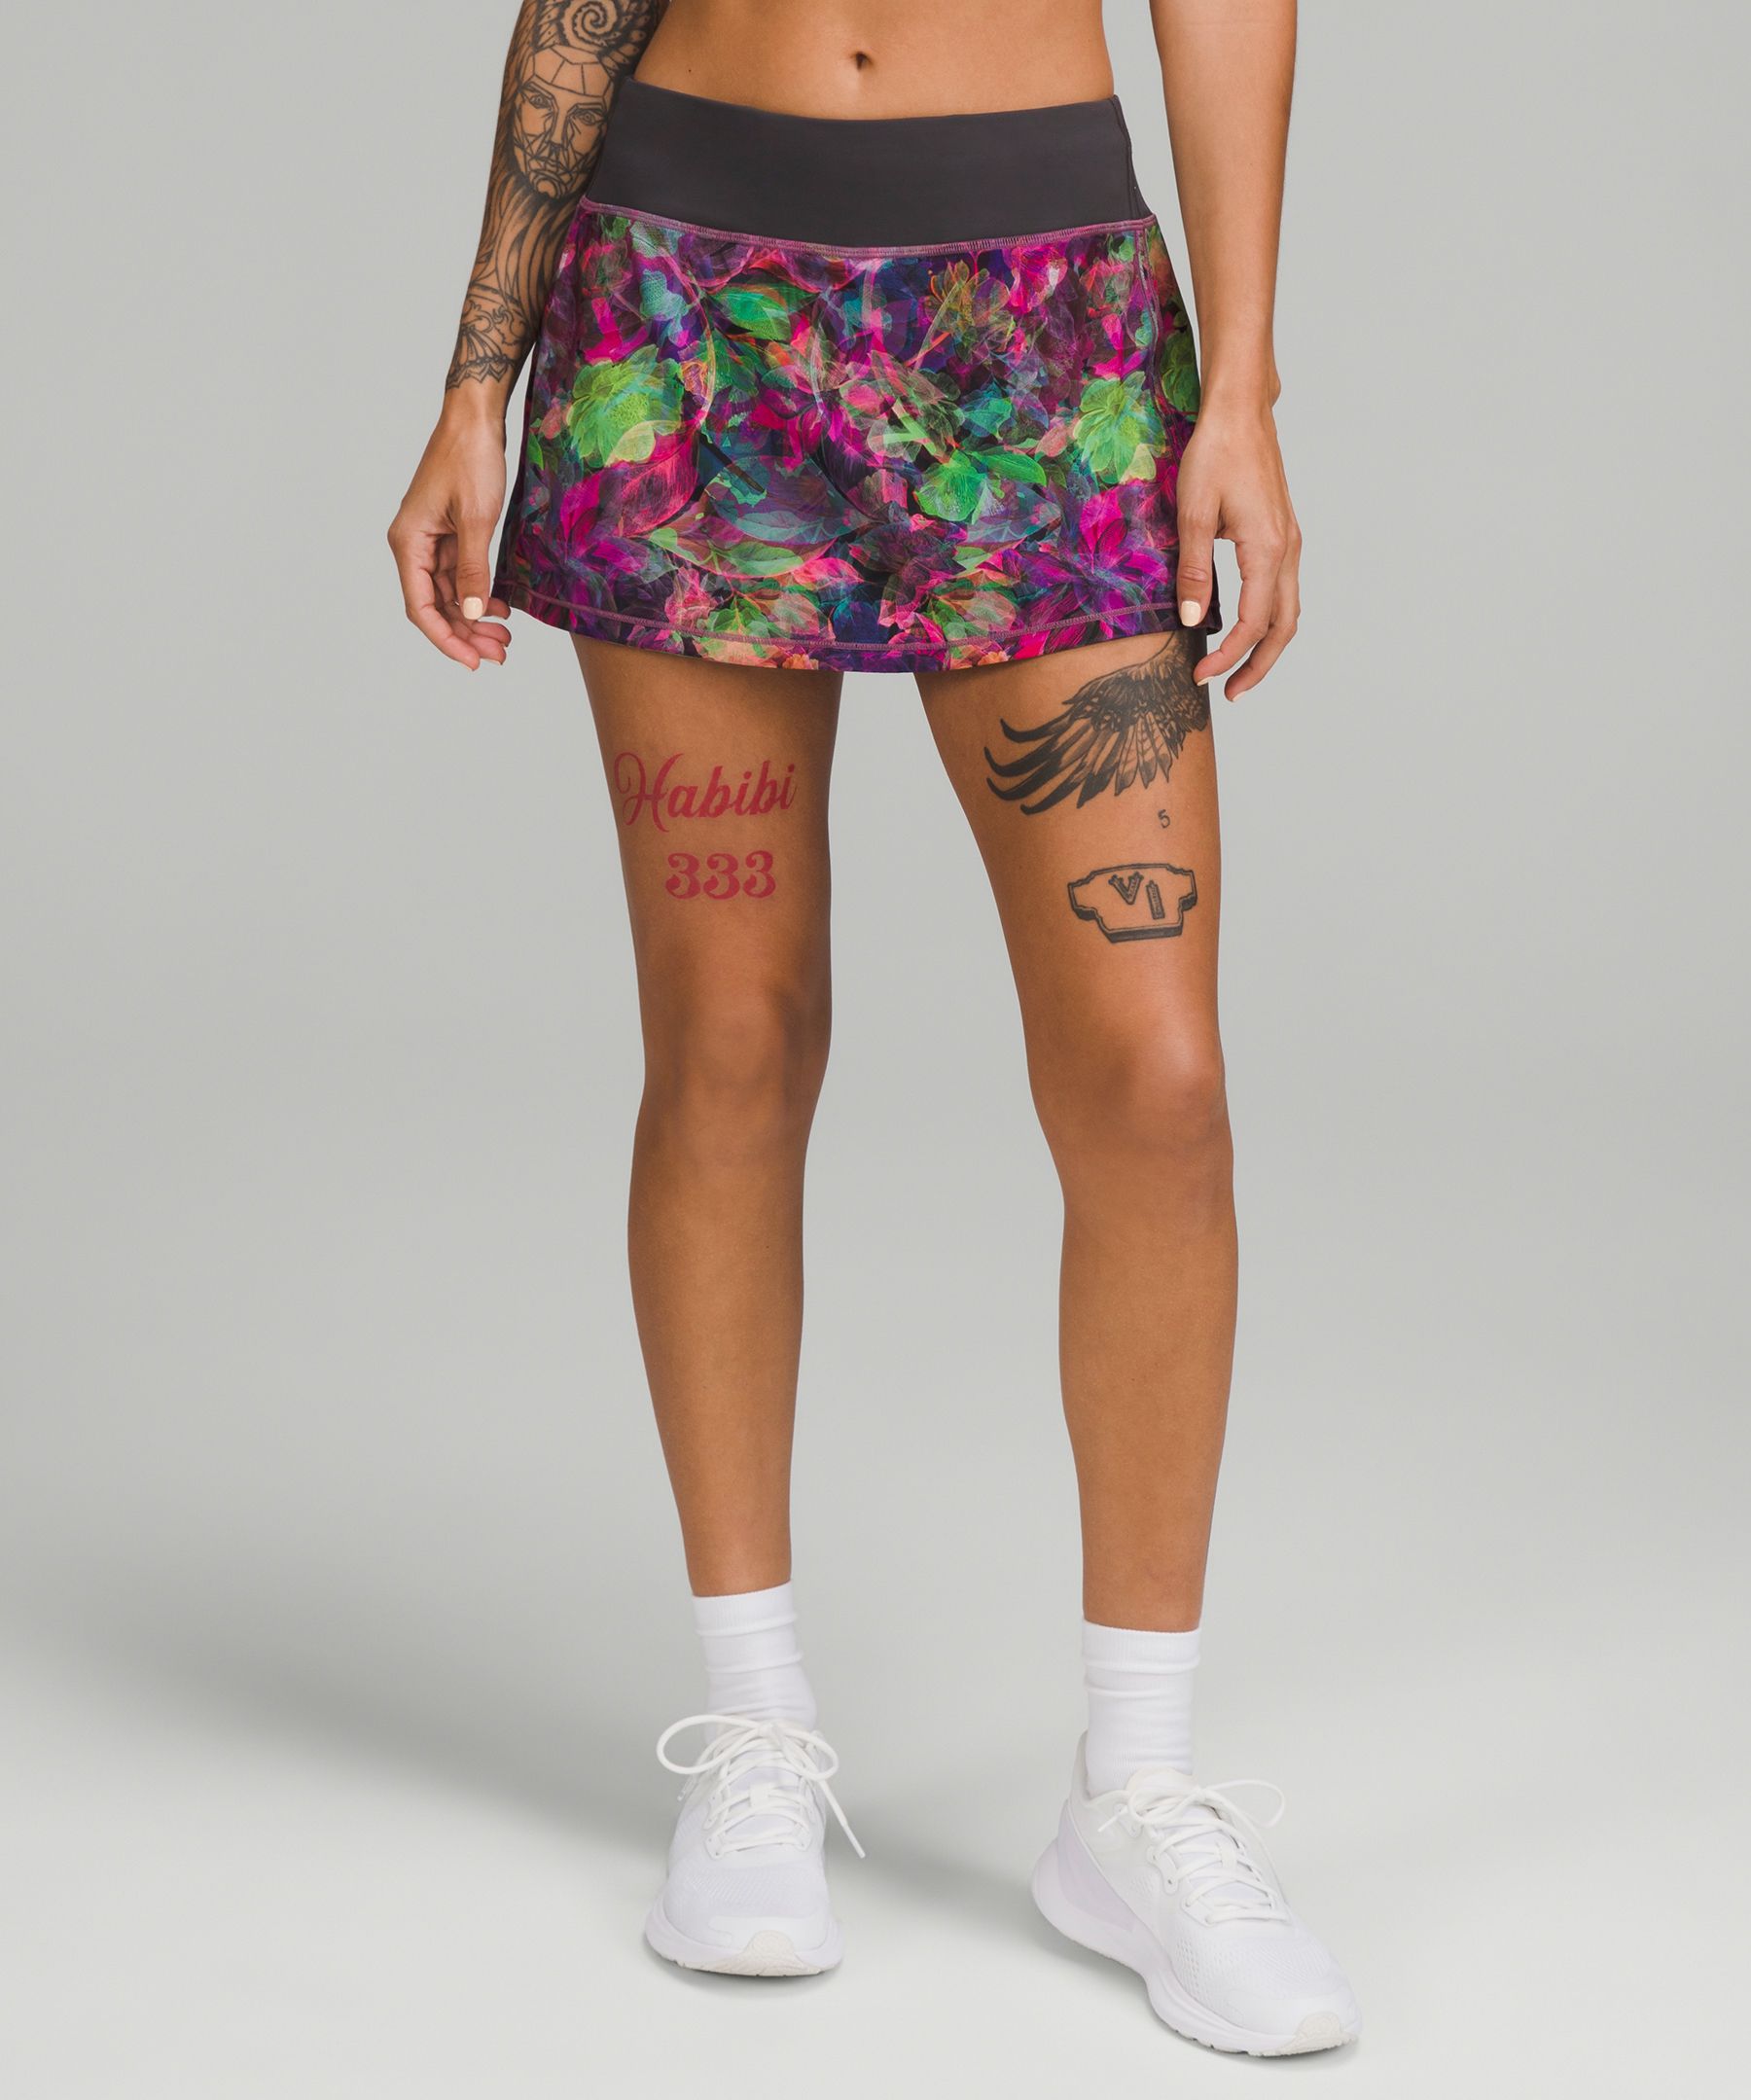 Lululemon Pace Rival Mid-rise Tennis Skirt In Vivid Floral Tone